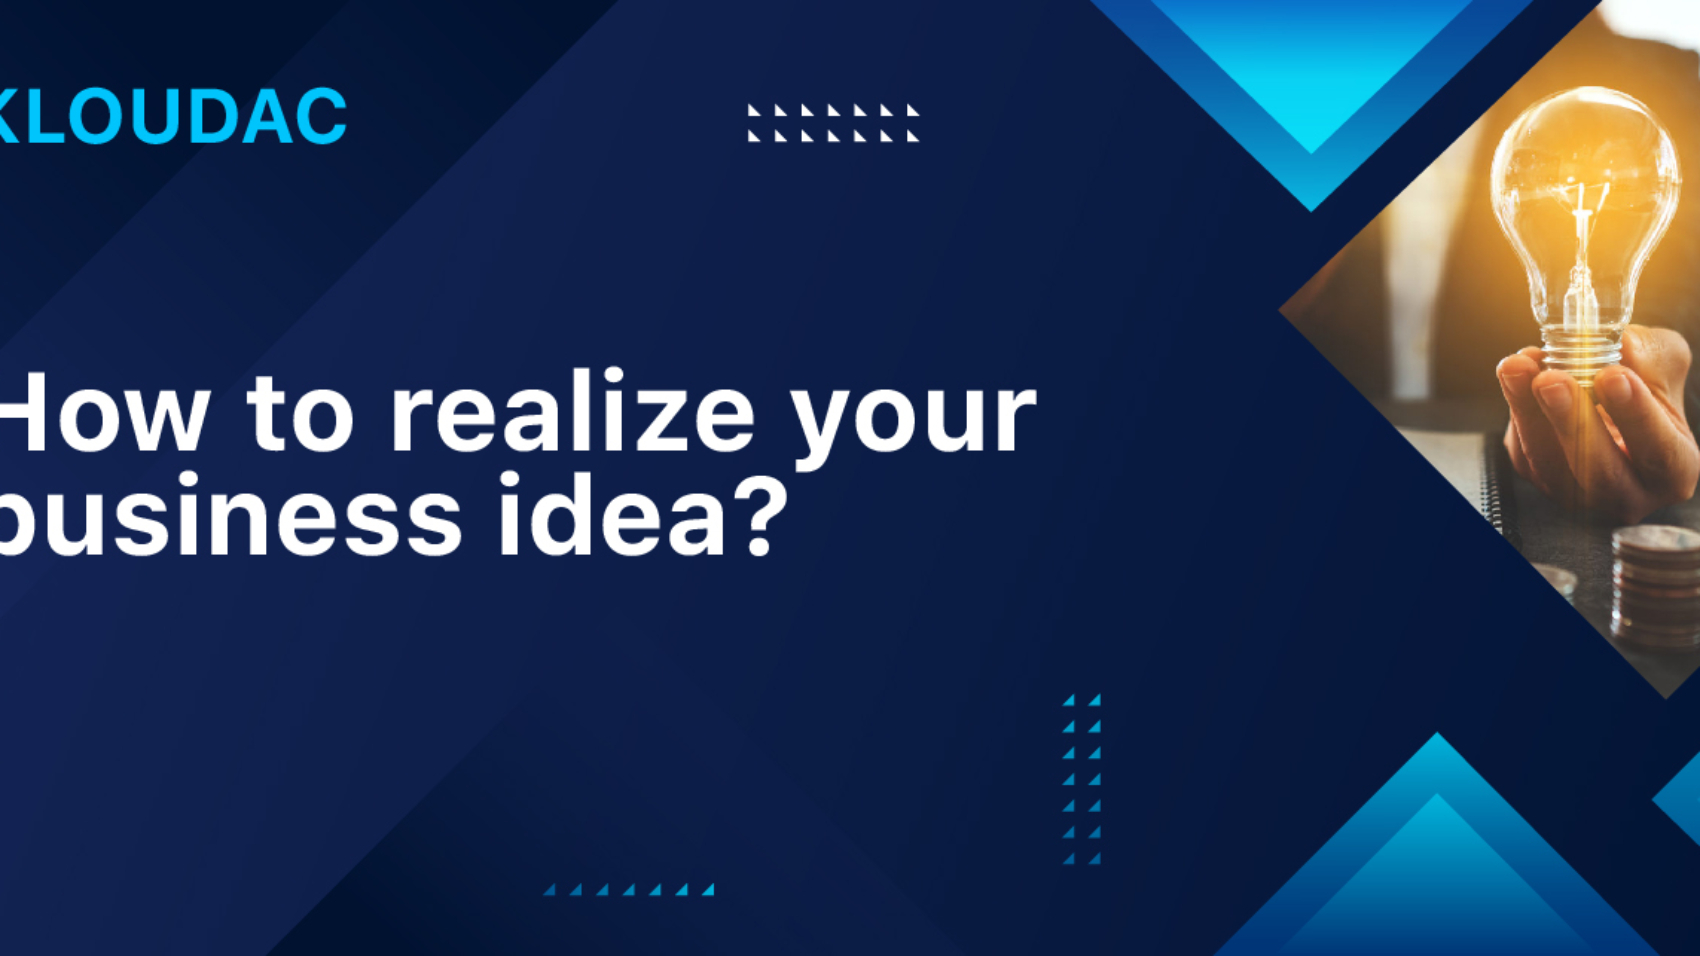 How to realize your business idea?